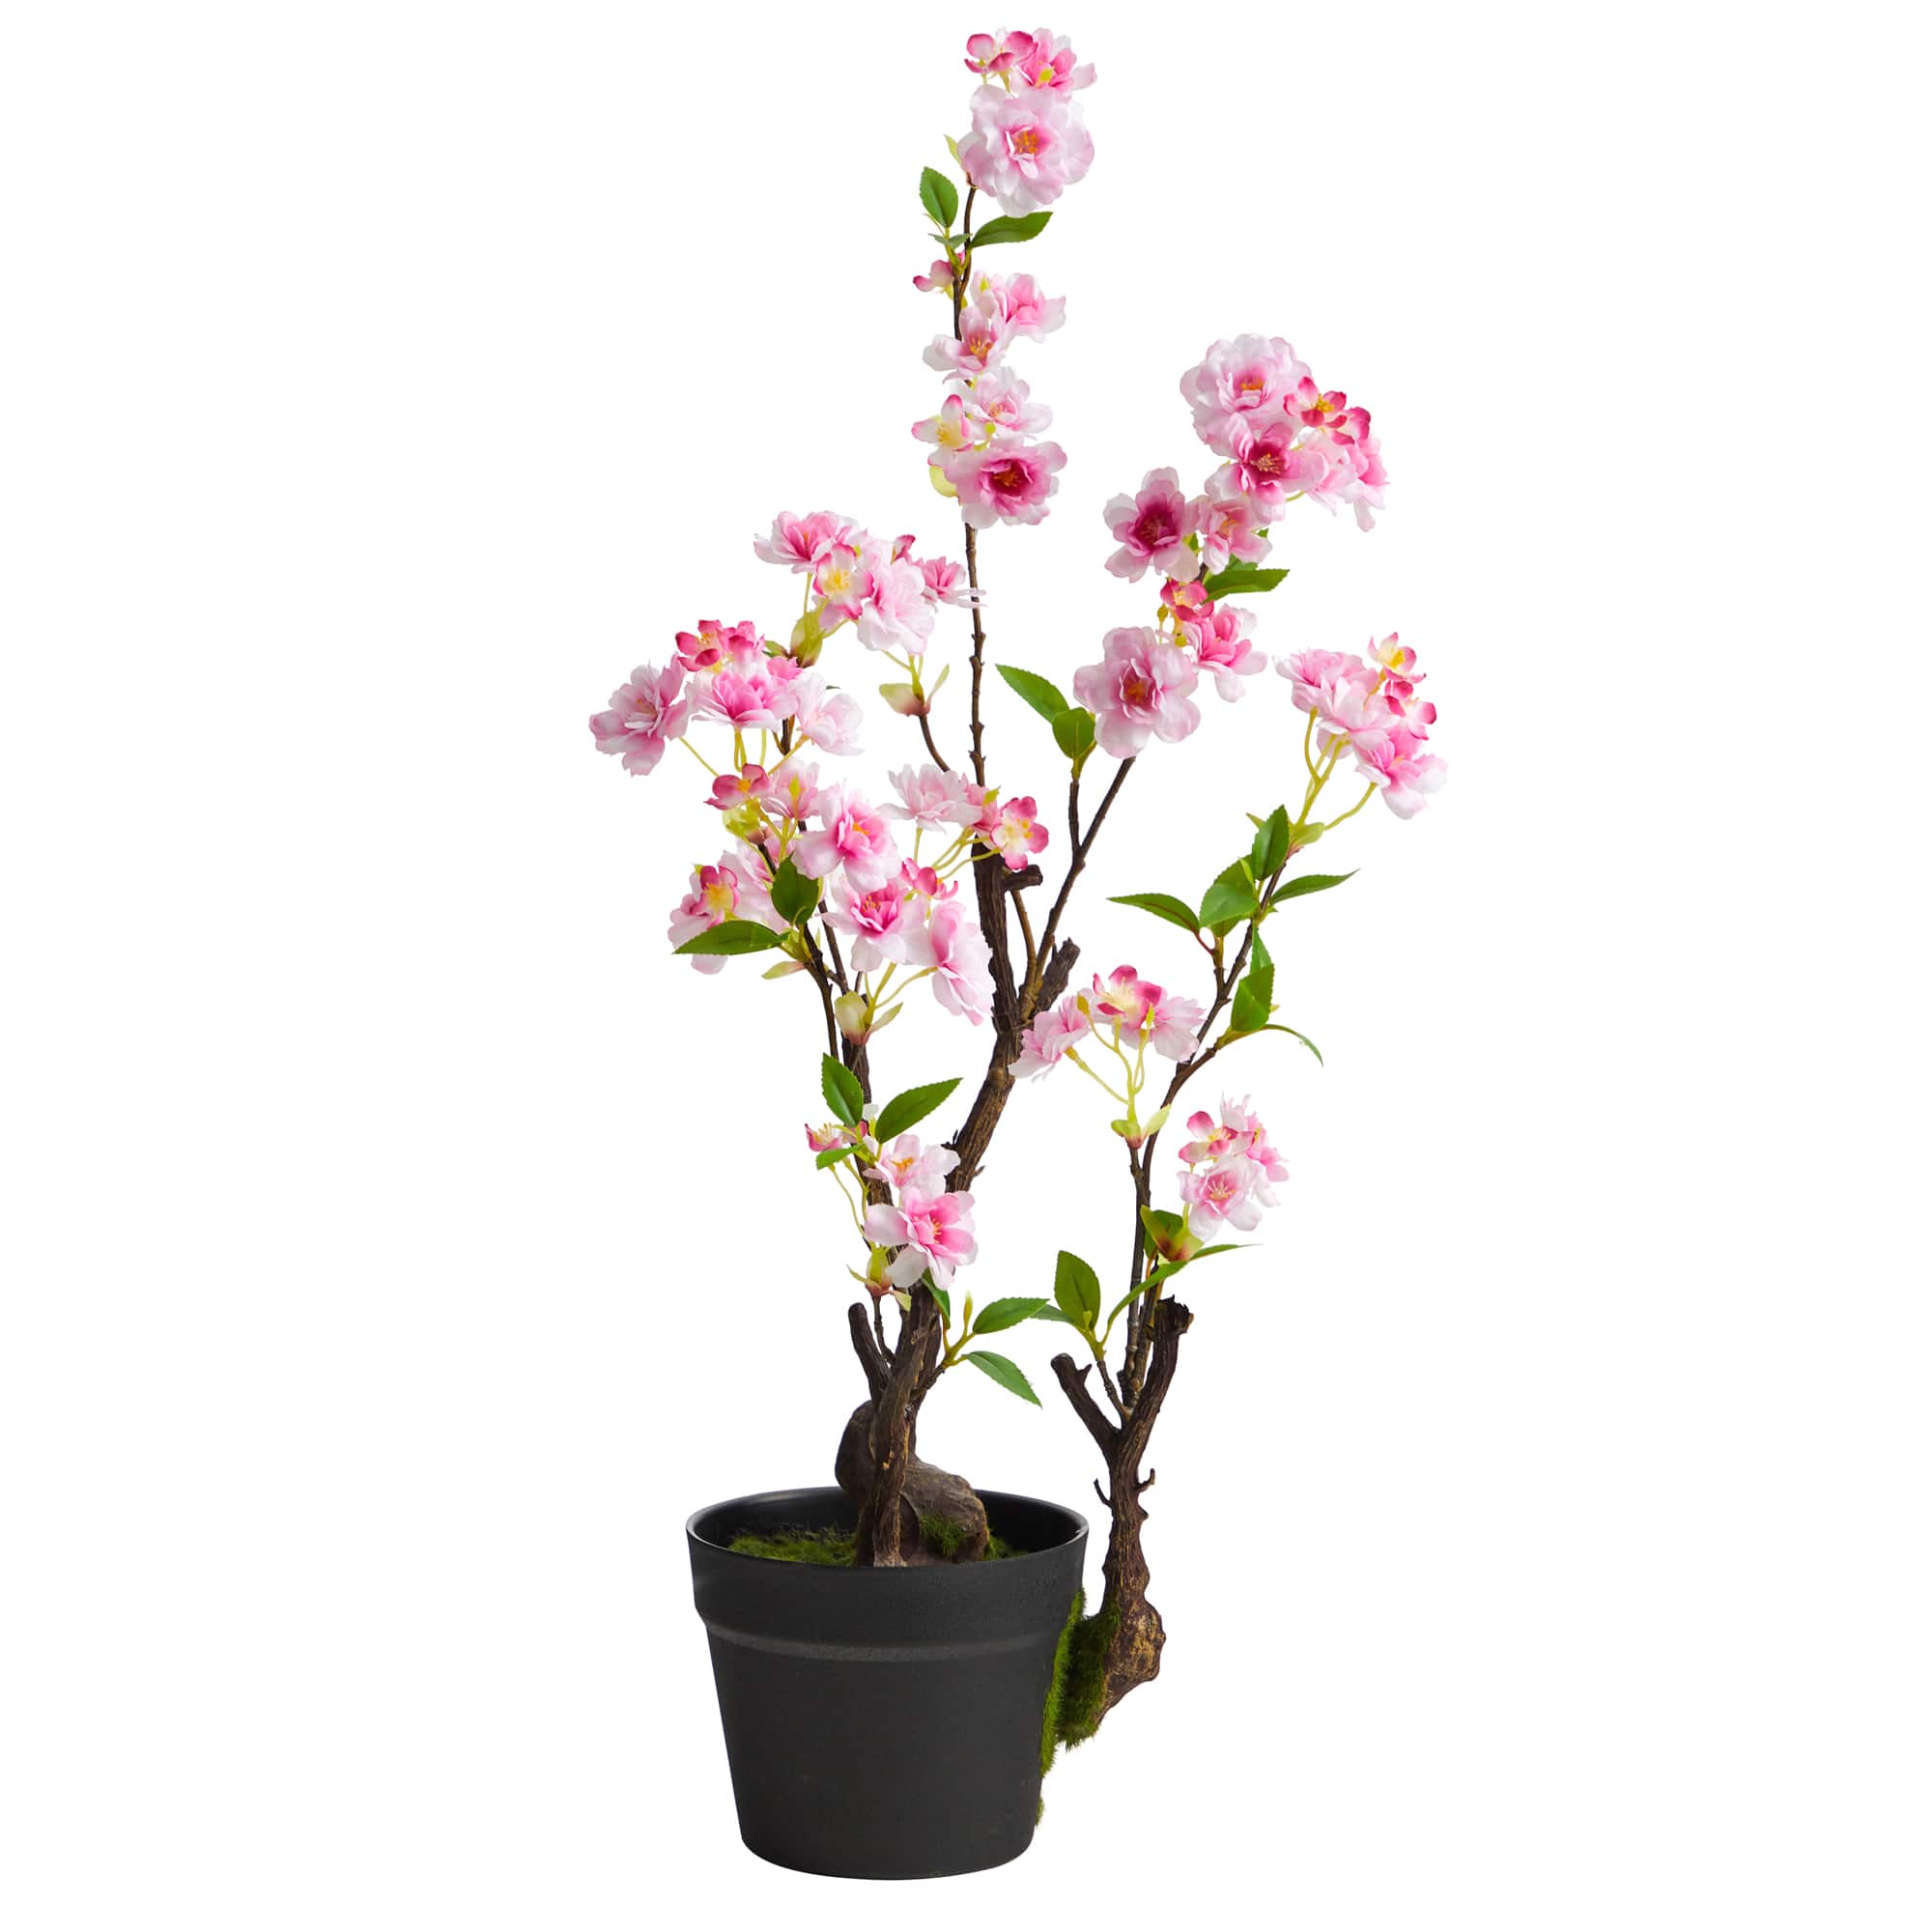 2.5ft. Potted Cherry Blossom Plant